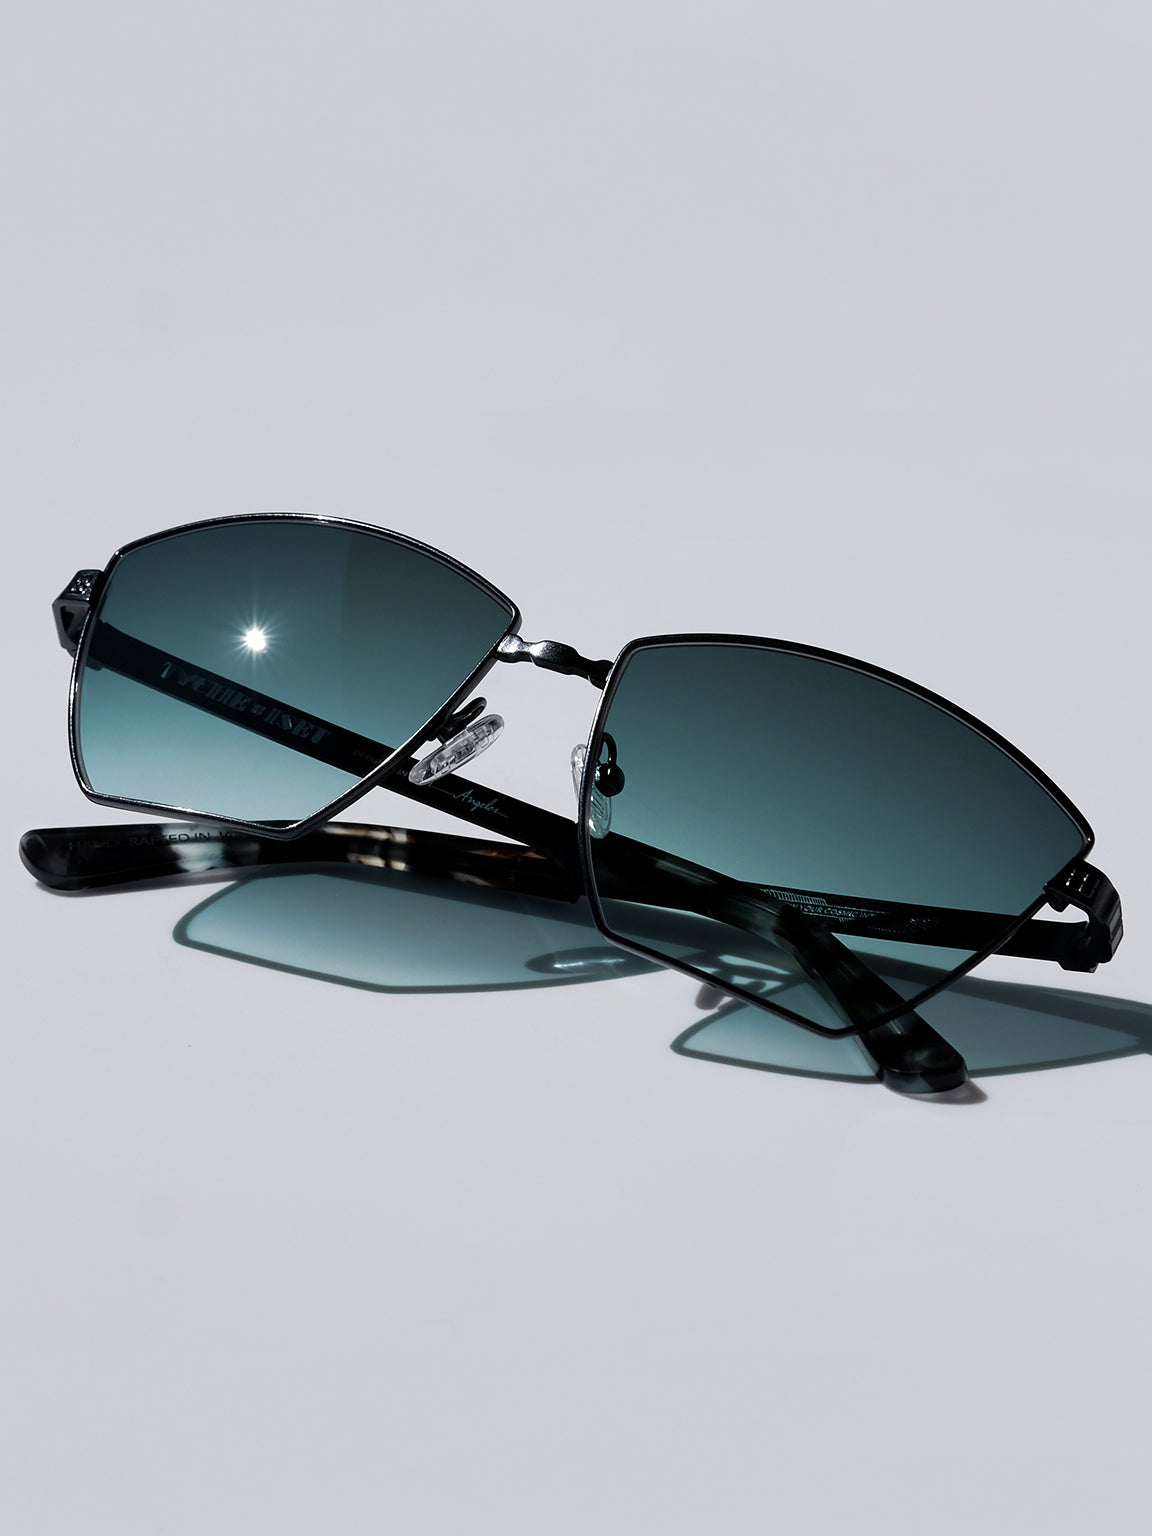 LABYRINTHE IN CARBON: BLACK TITANIUM METAL FRAME SUNGLASSES WITH TEAL